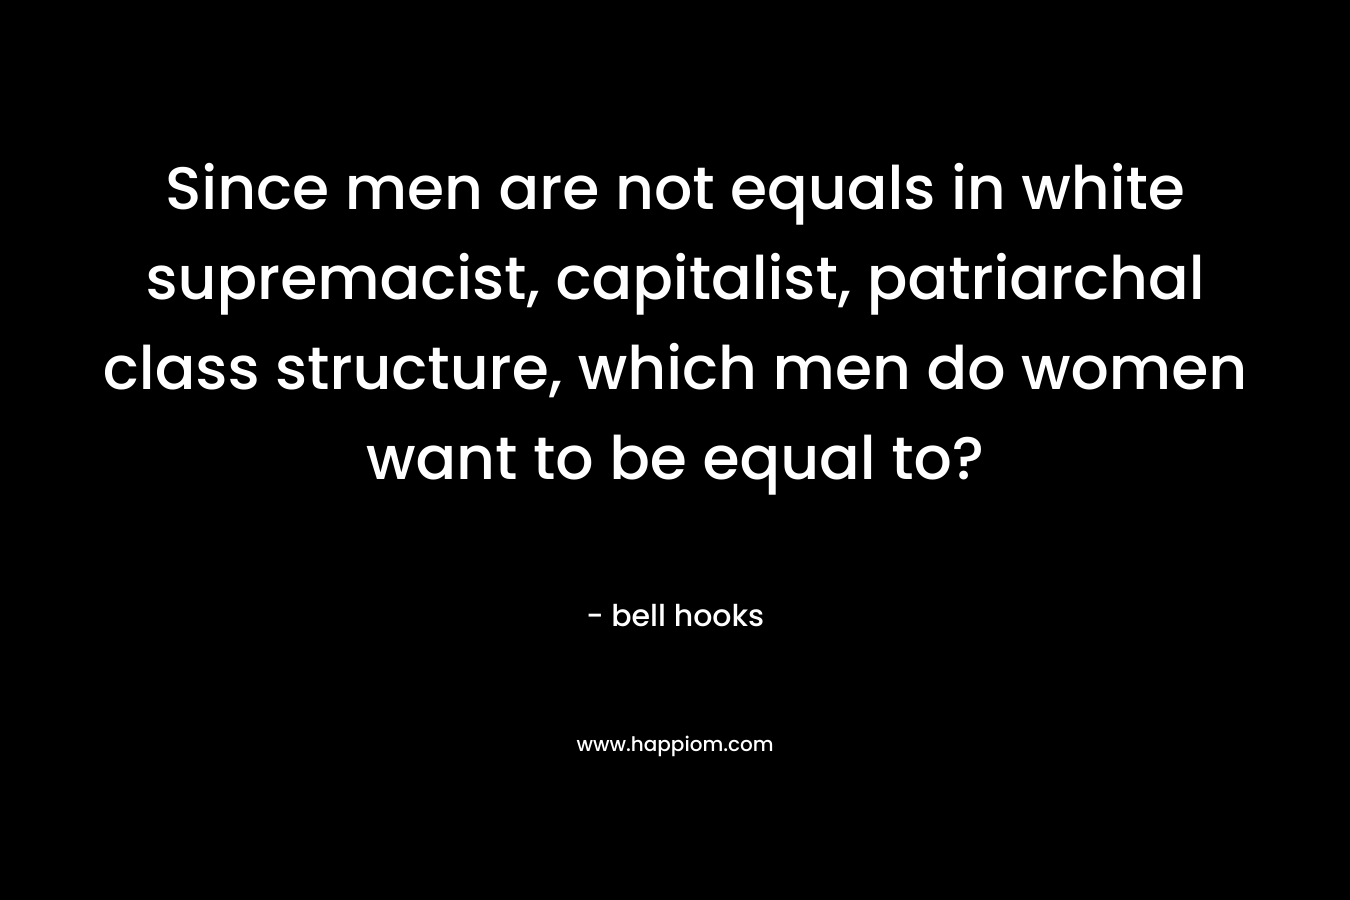 Since men are not equals in white supremacist, capitalist, patriarchal class structure, which men do women want to be equal to?